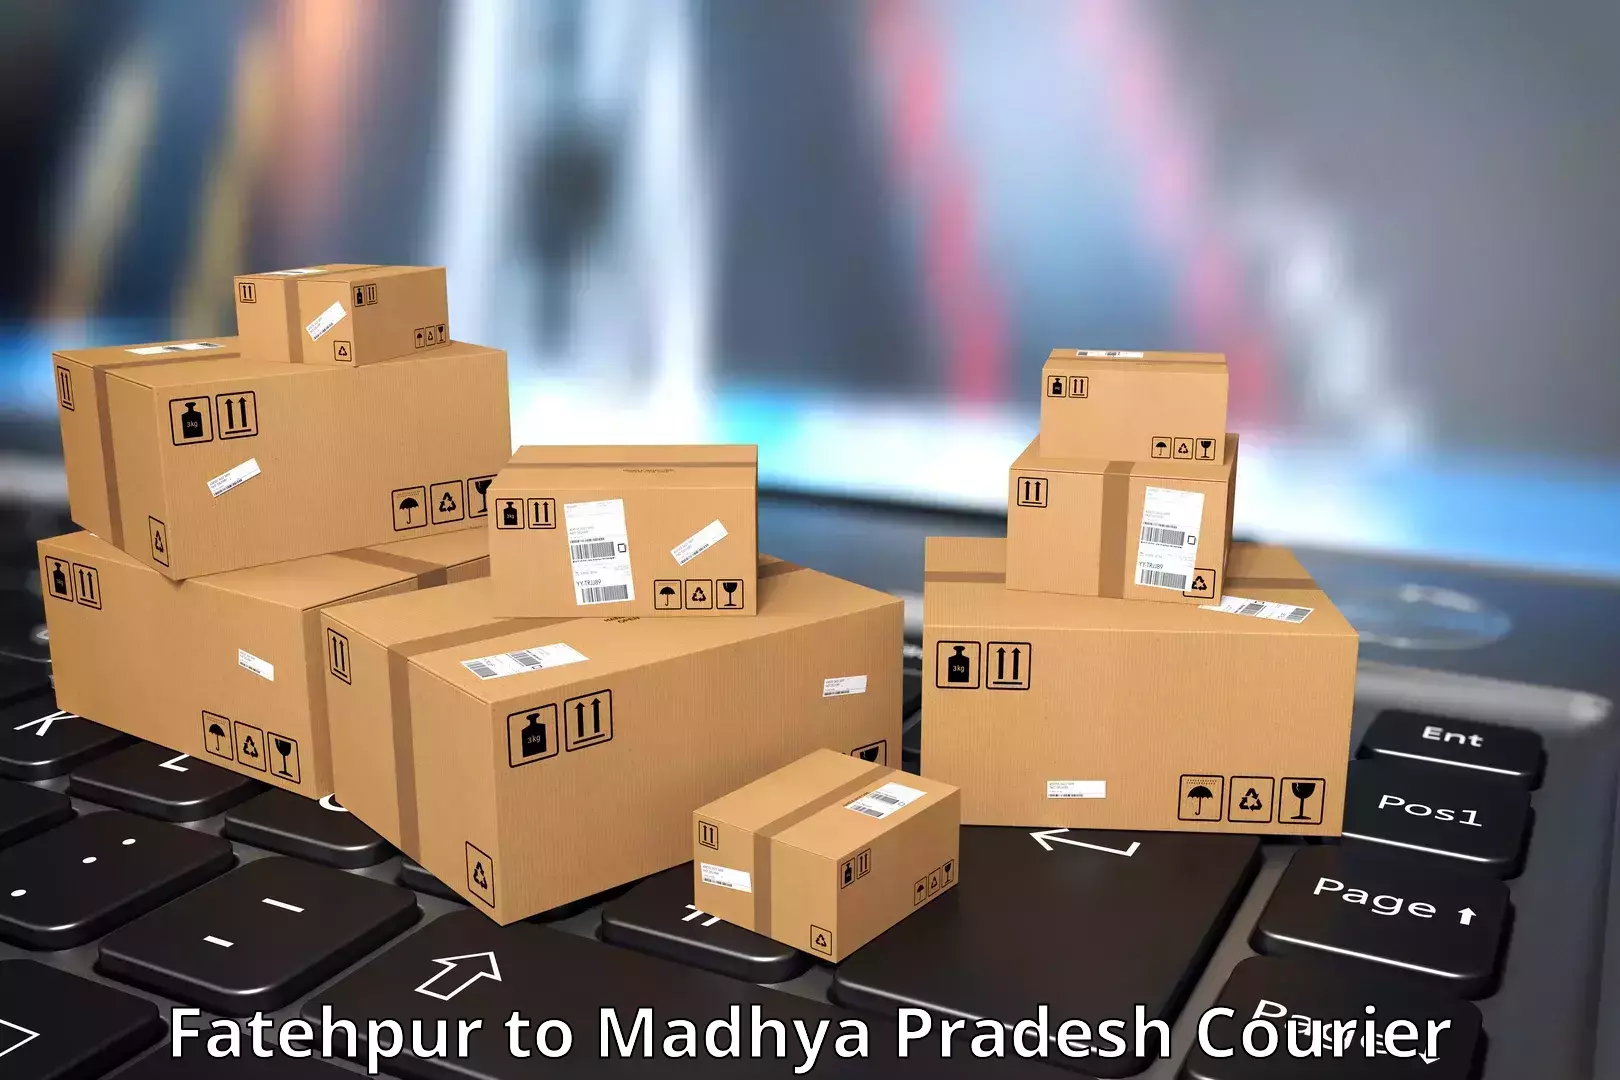 Parcel service for businesses Fatehpur to Deosar